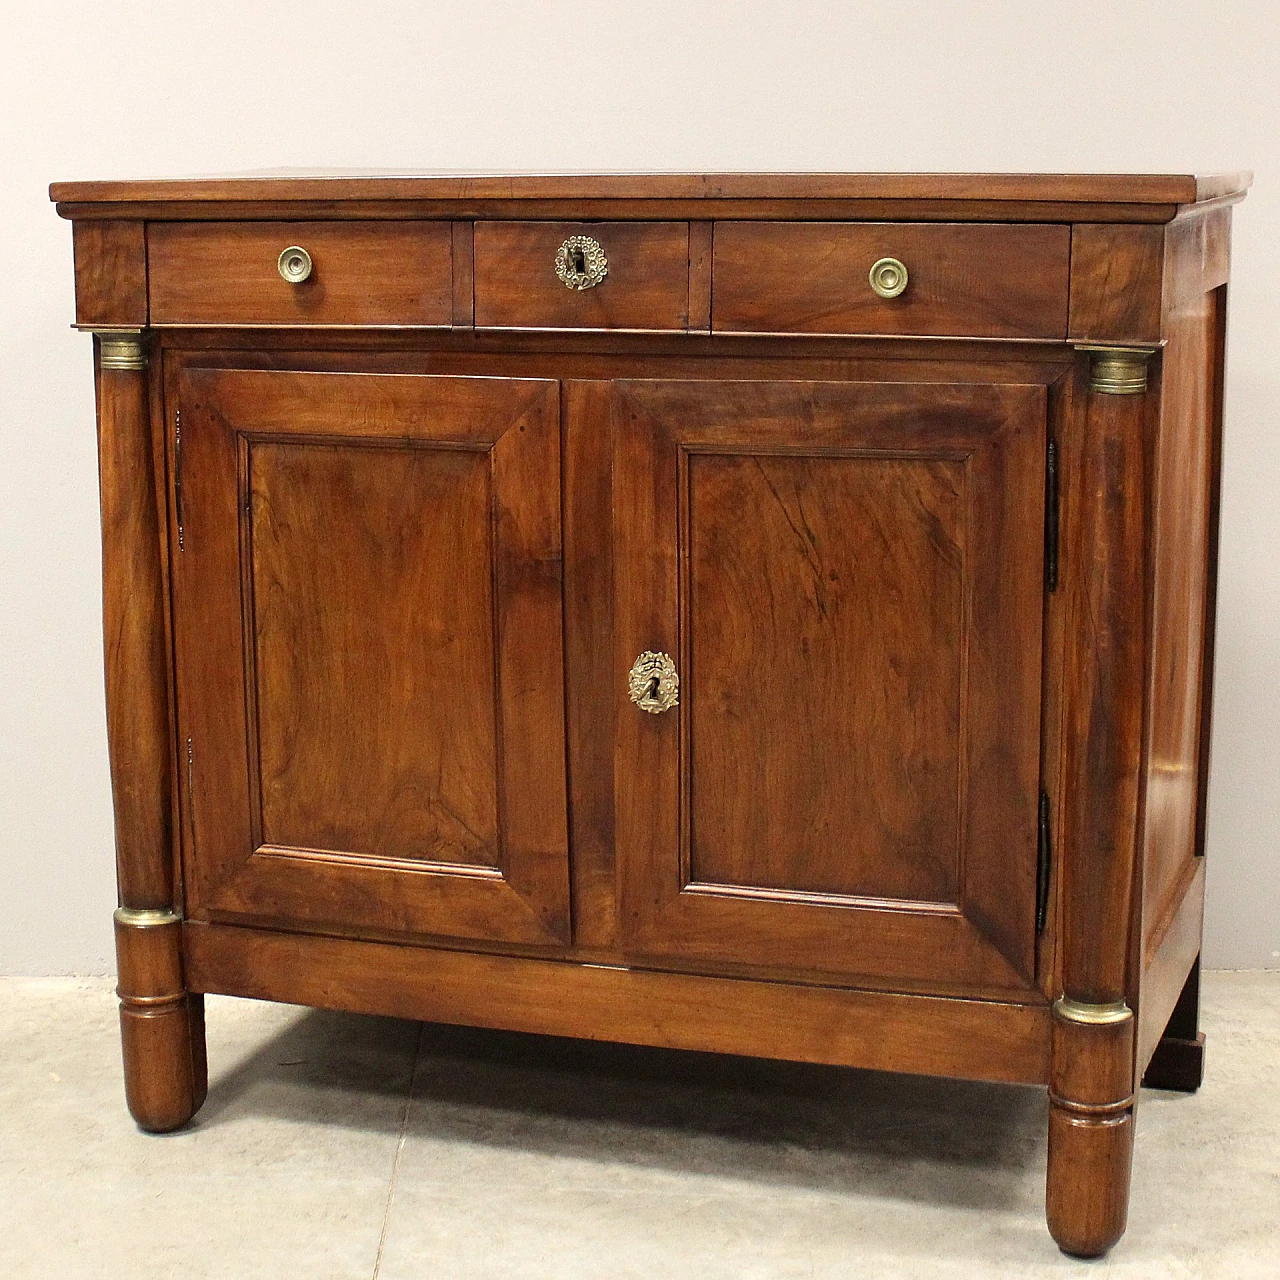 Empire walnut sideboard with doors and drawers, early 19th century 5